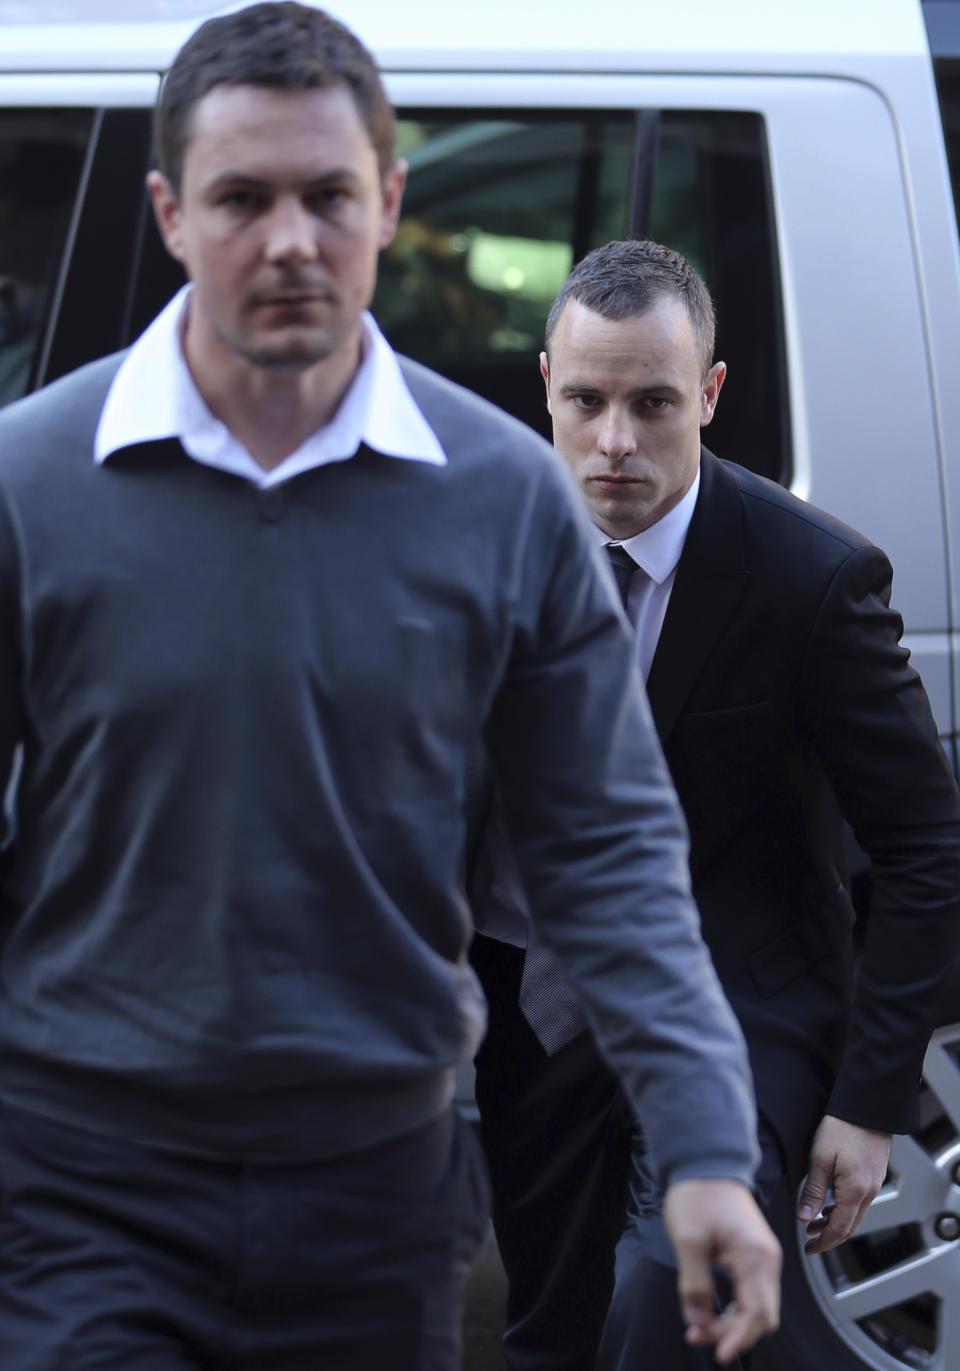 Oscar Pistorius, right, accompanied by an unidentified relative, arrives at the high court in Pretoria, South Africa, Monday, March 12, 2014. Pistorius is charged with murder for the shooting death of his girlfriend, Reeva Steenkamp, on Valentines Day in 2013. (AP Photo/Themba Hadebe)